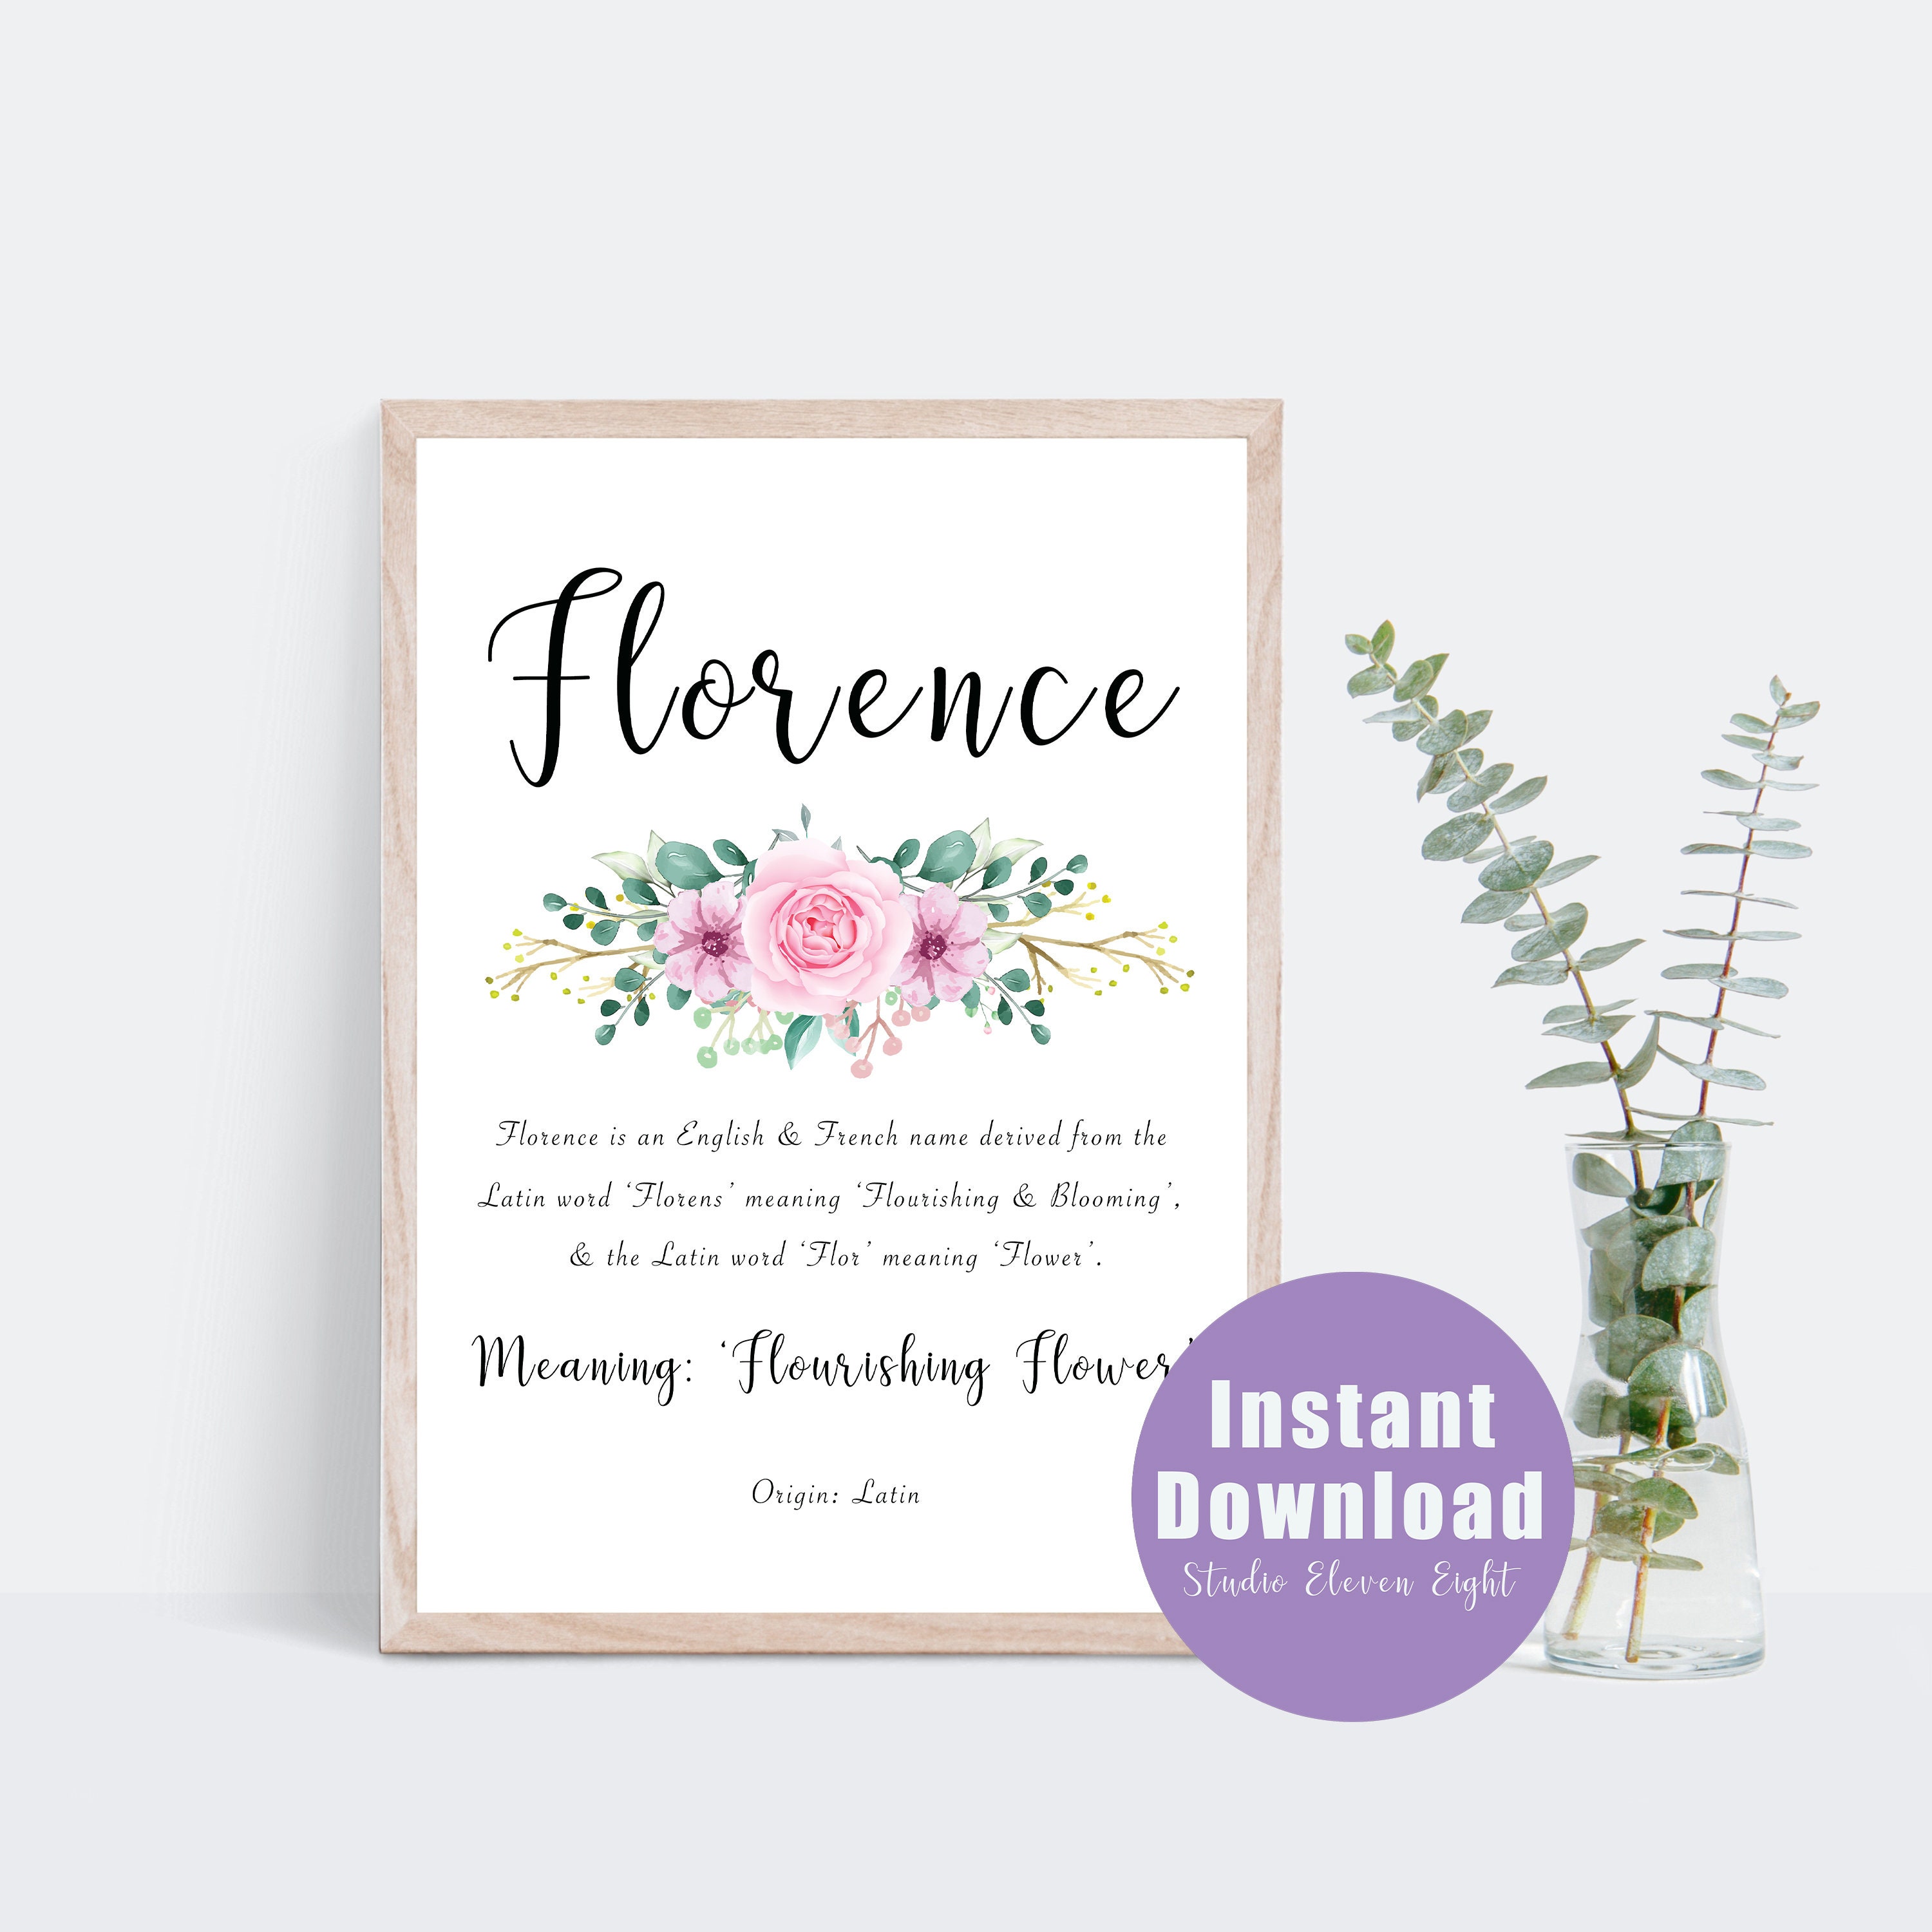 Happy Birthday 2 - Florence Flowers and Gifts Shop, Philippines